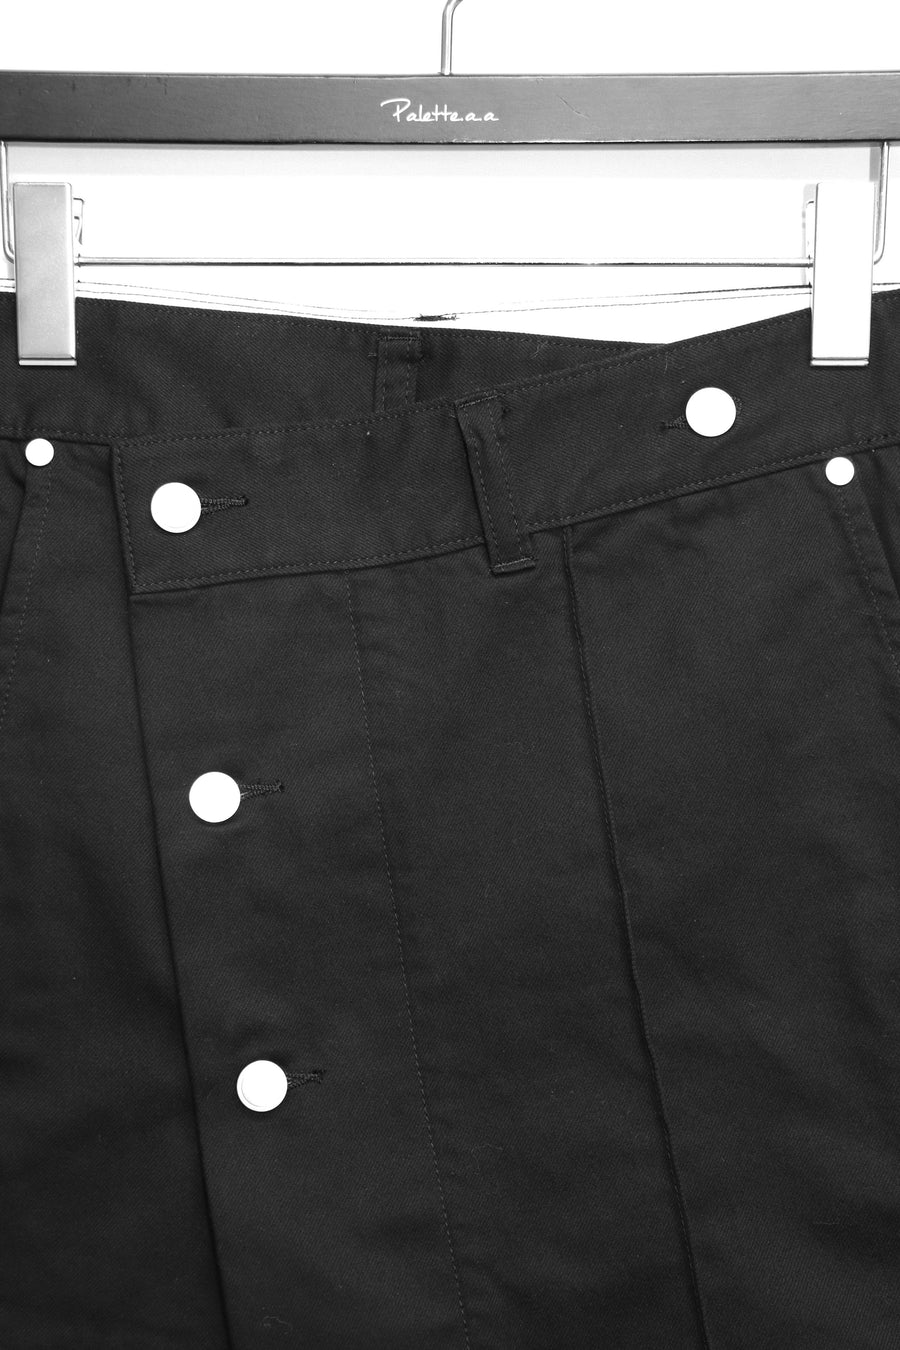 Voltage Control Filter  Modified Chino Wrap Skirt